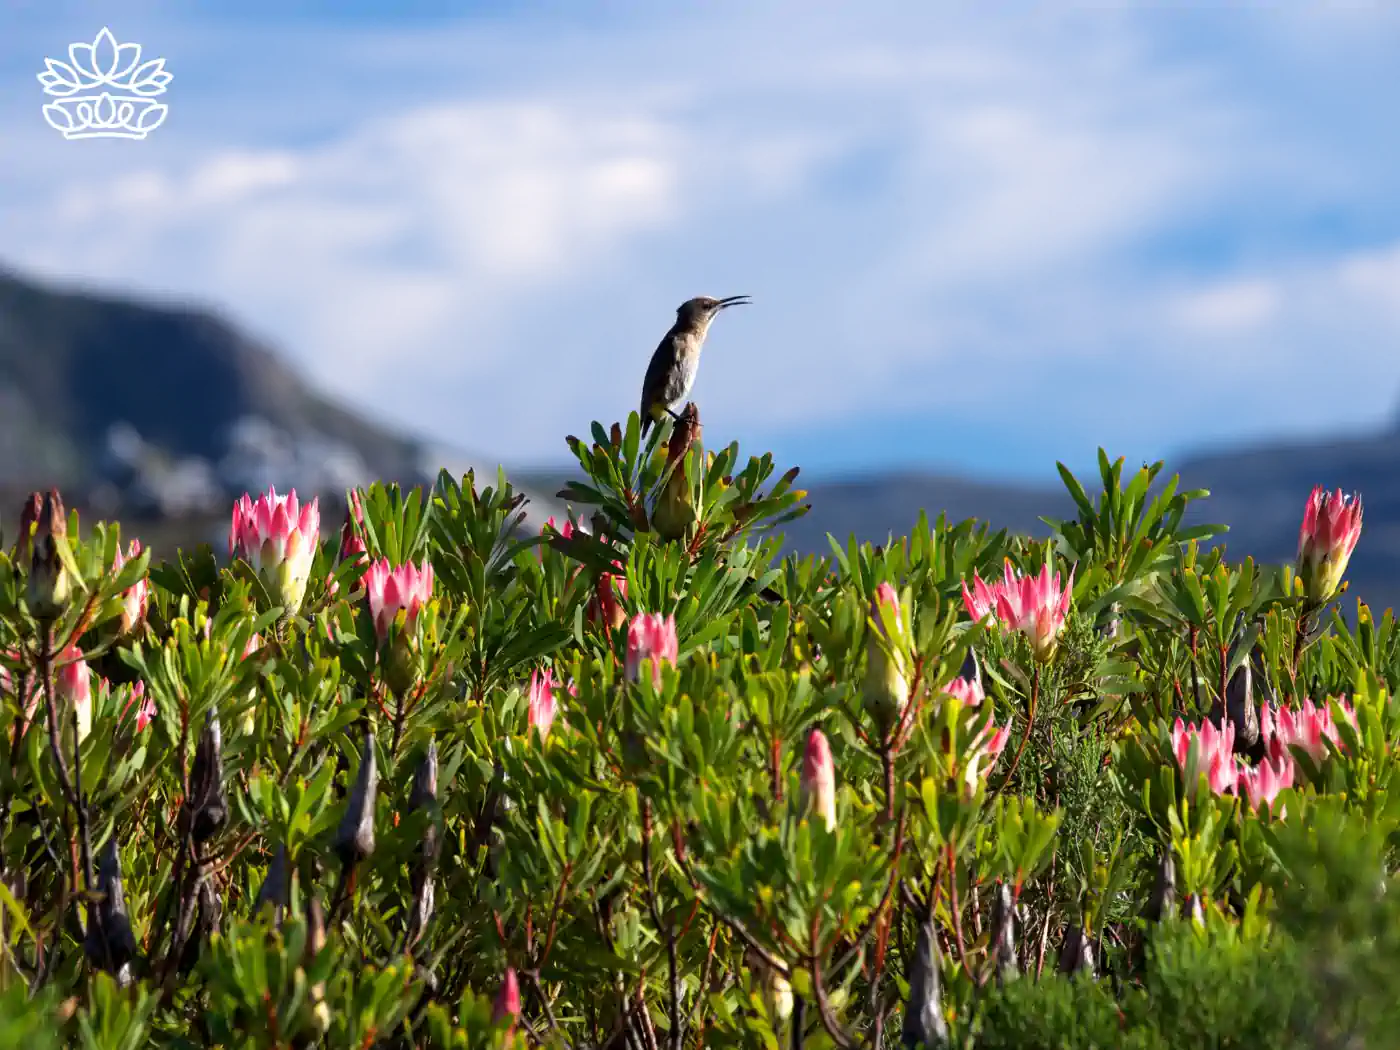 Pink Protea flowers in a natural habitat with a bird perched on a branch - Fabulous Flowers and Gifts, Proteas Collection